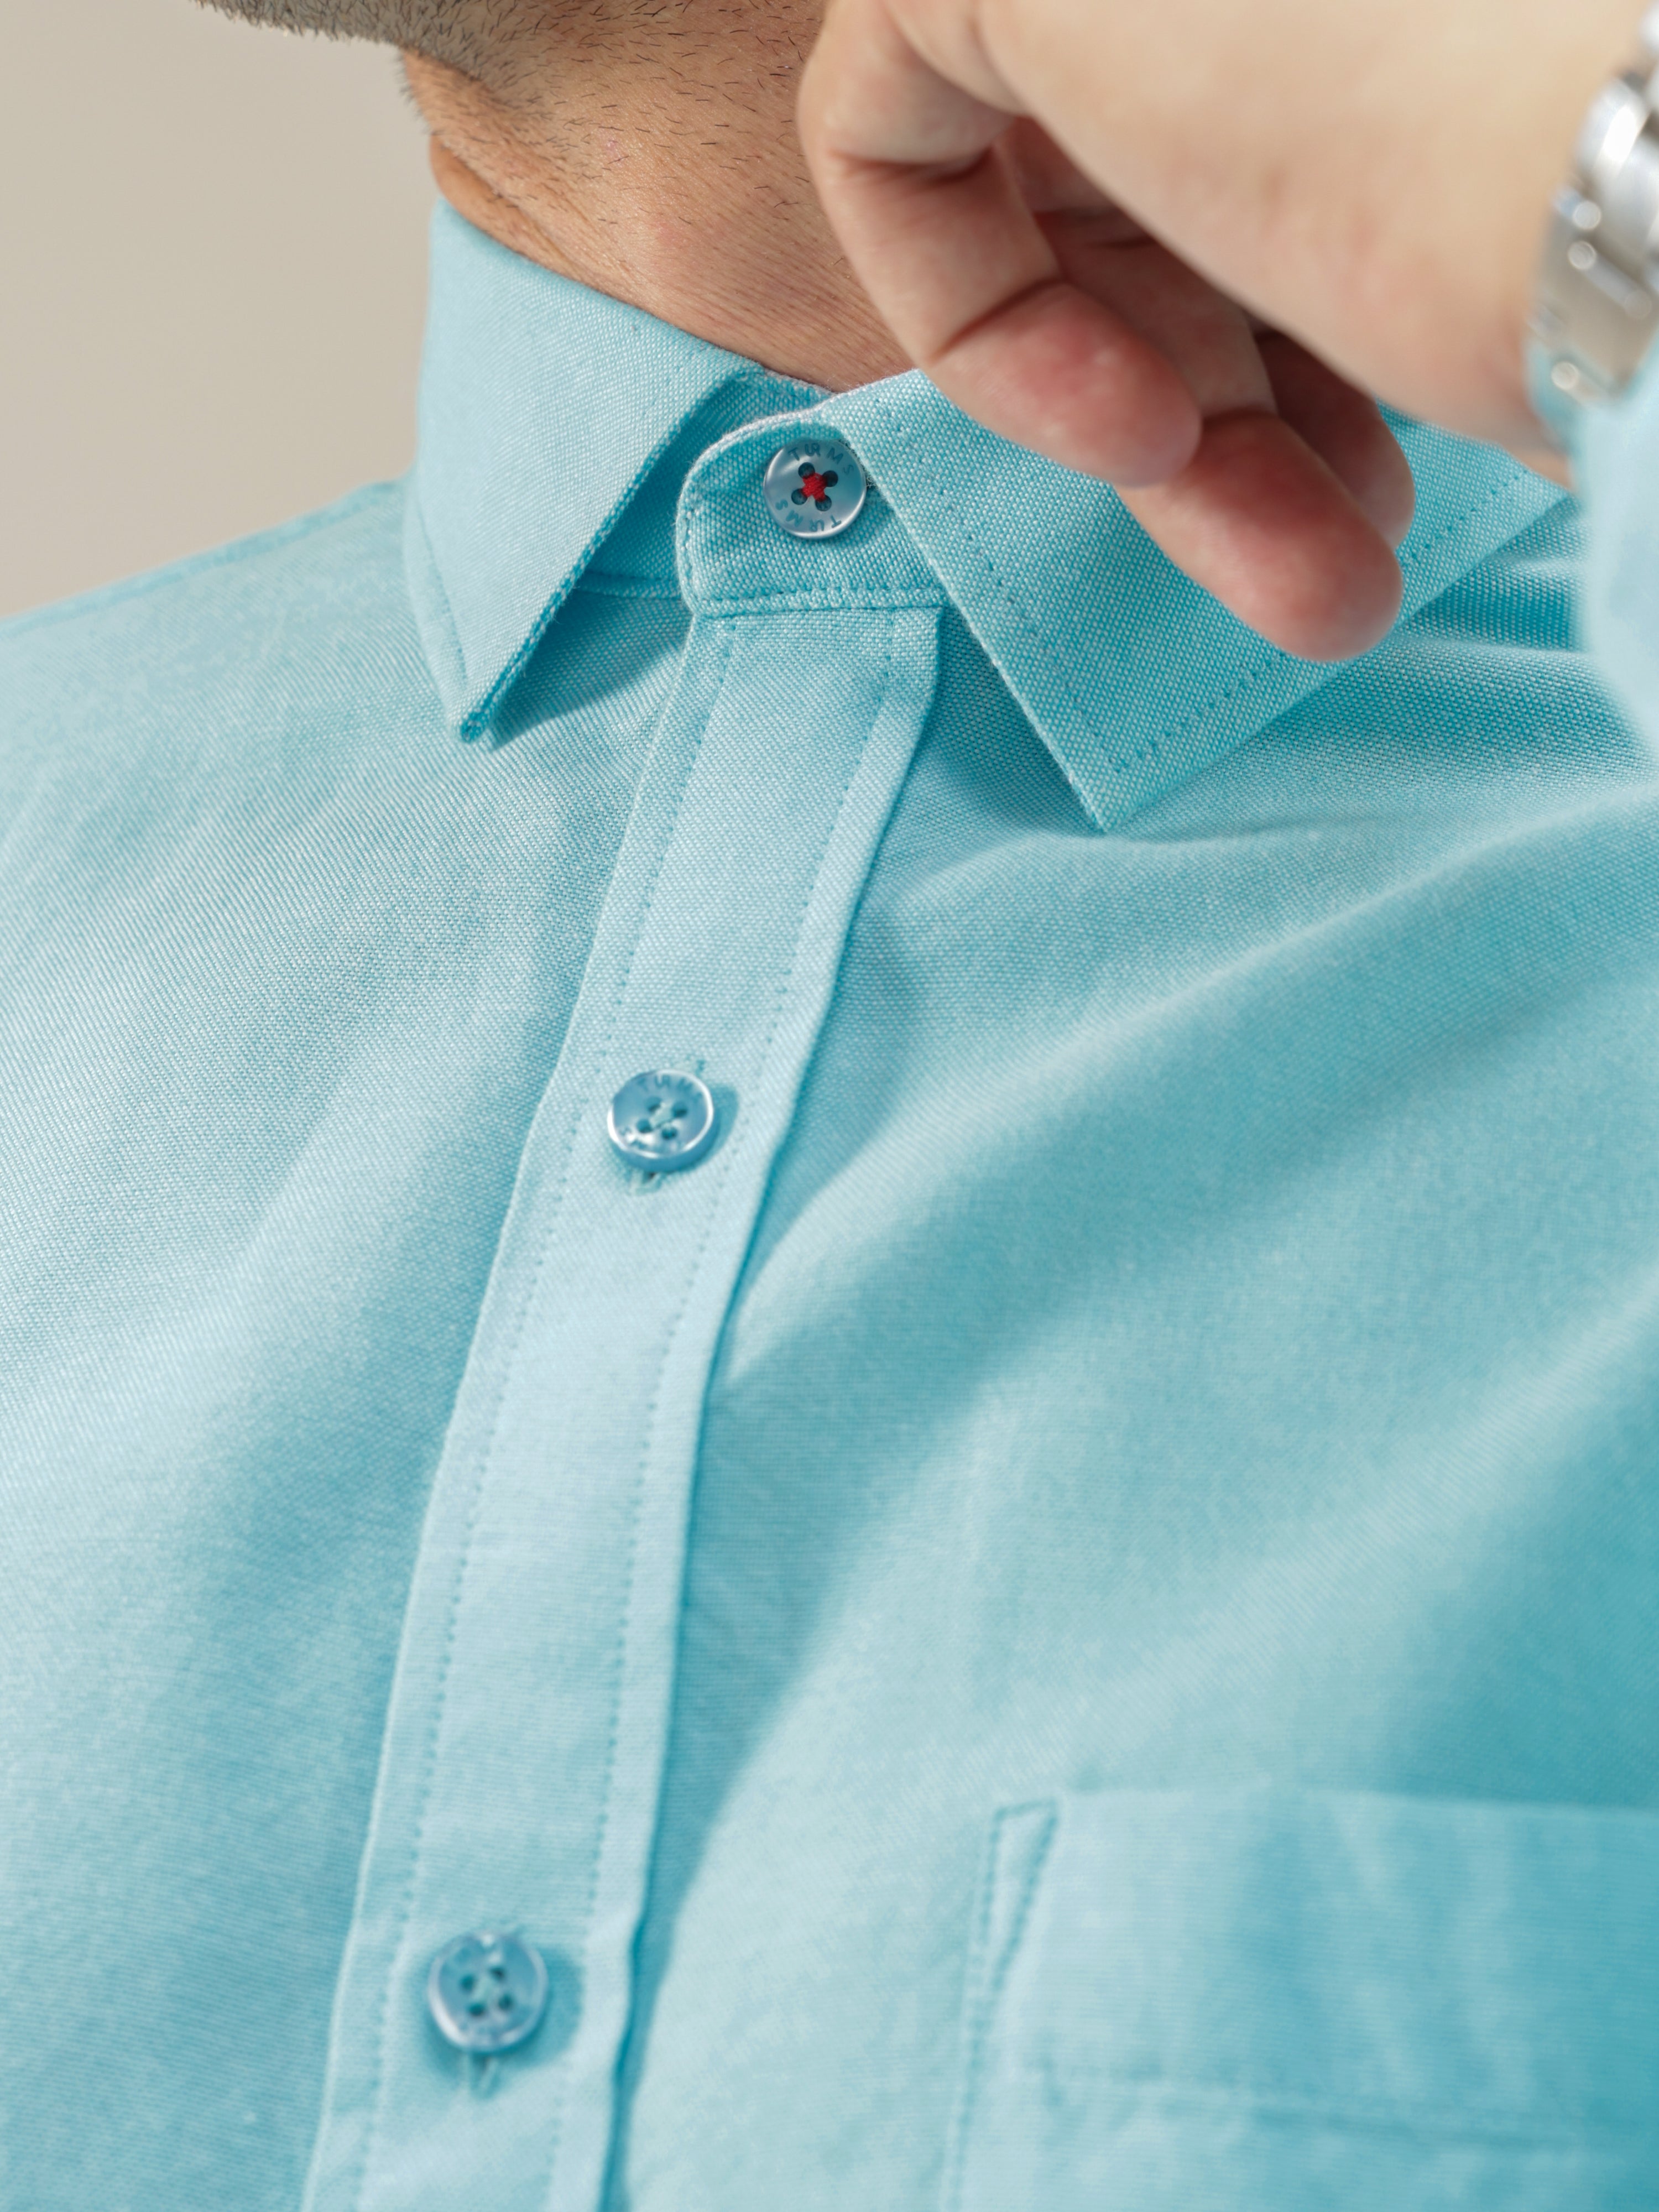 Turquoise Oasis men's shirt made of premium-grade super combed cotton, showcasing meticulous stitching and a crisp collar for stylish menswear.